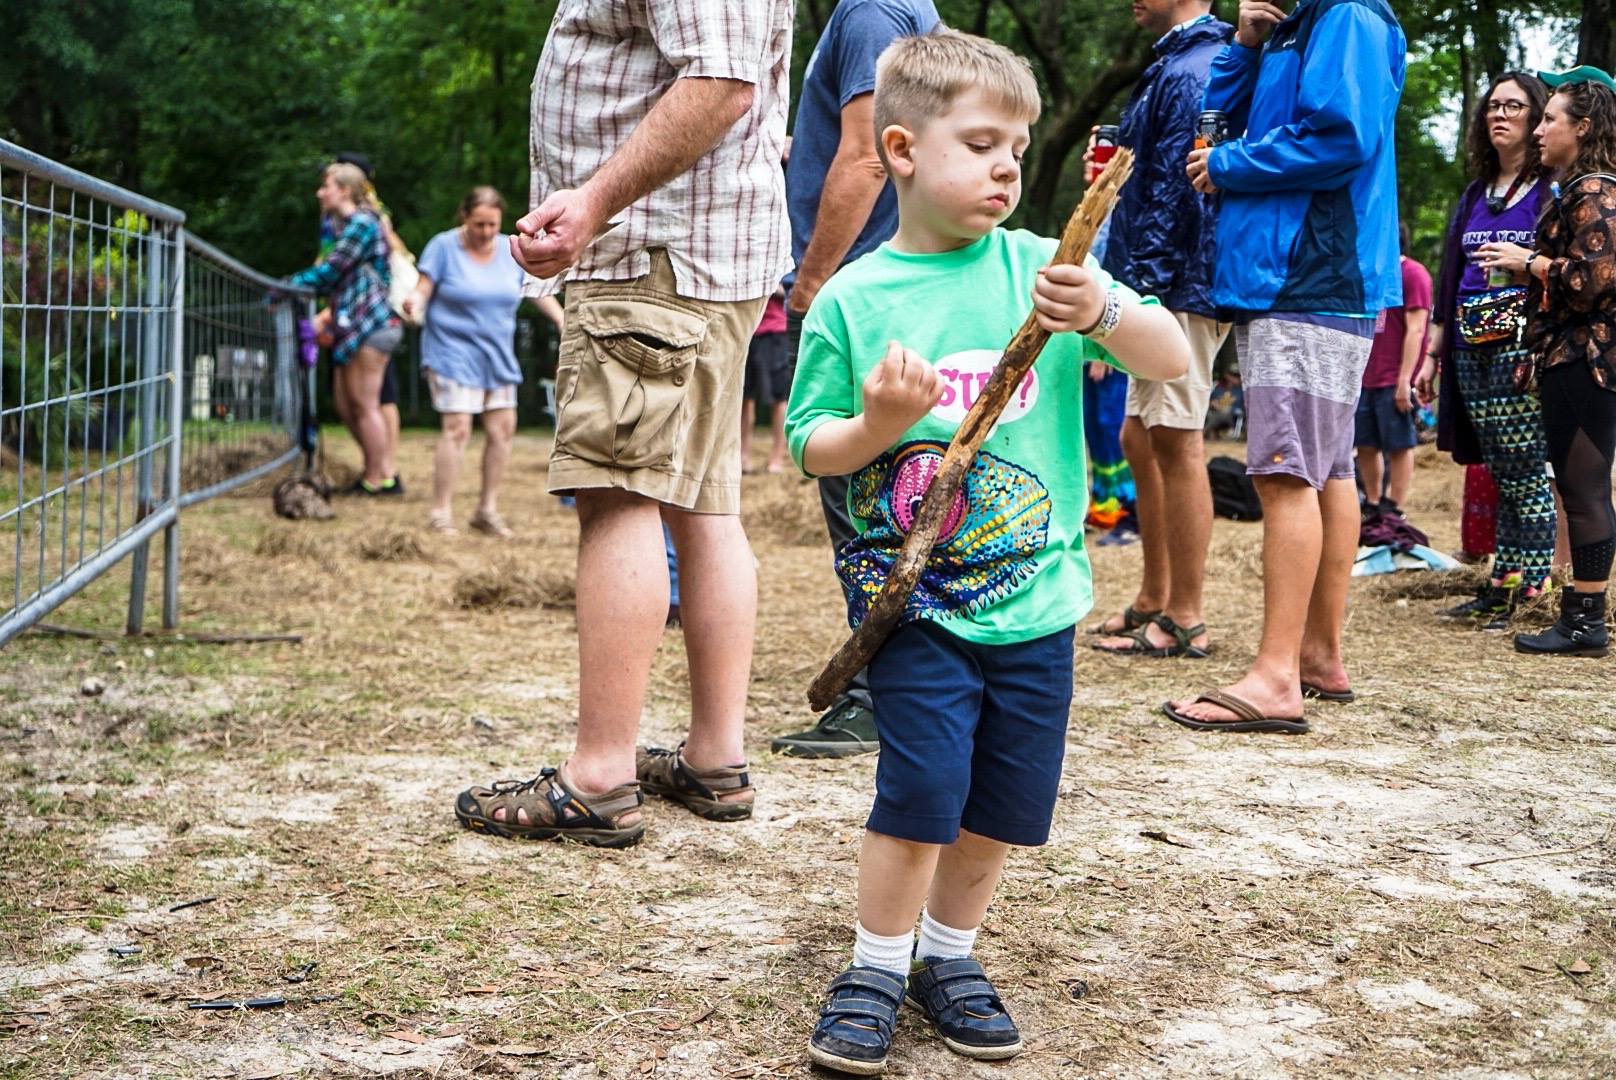 Suwannee is a great place for kids of all ages